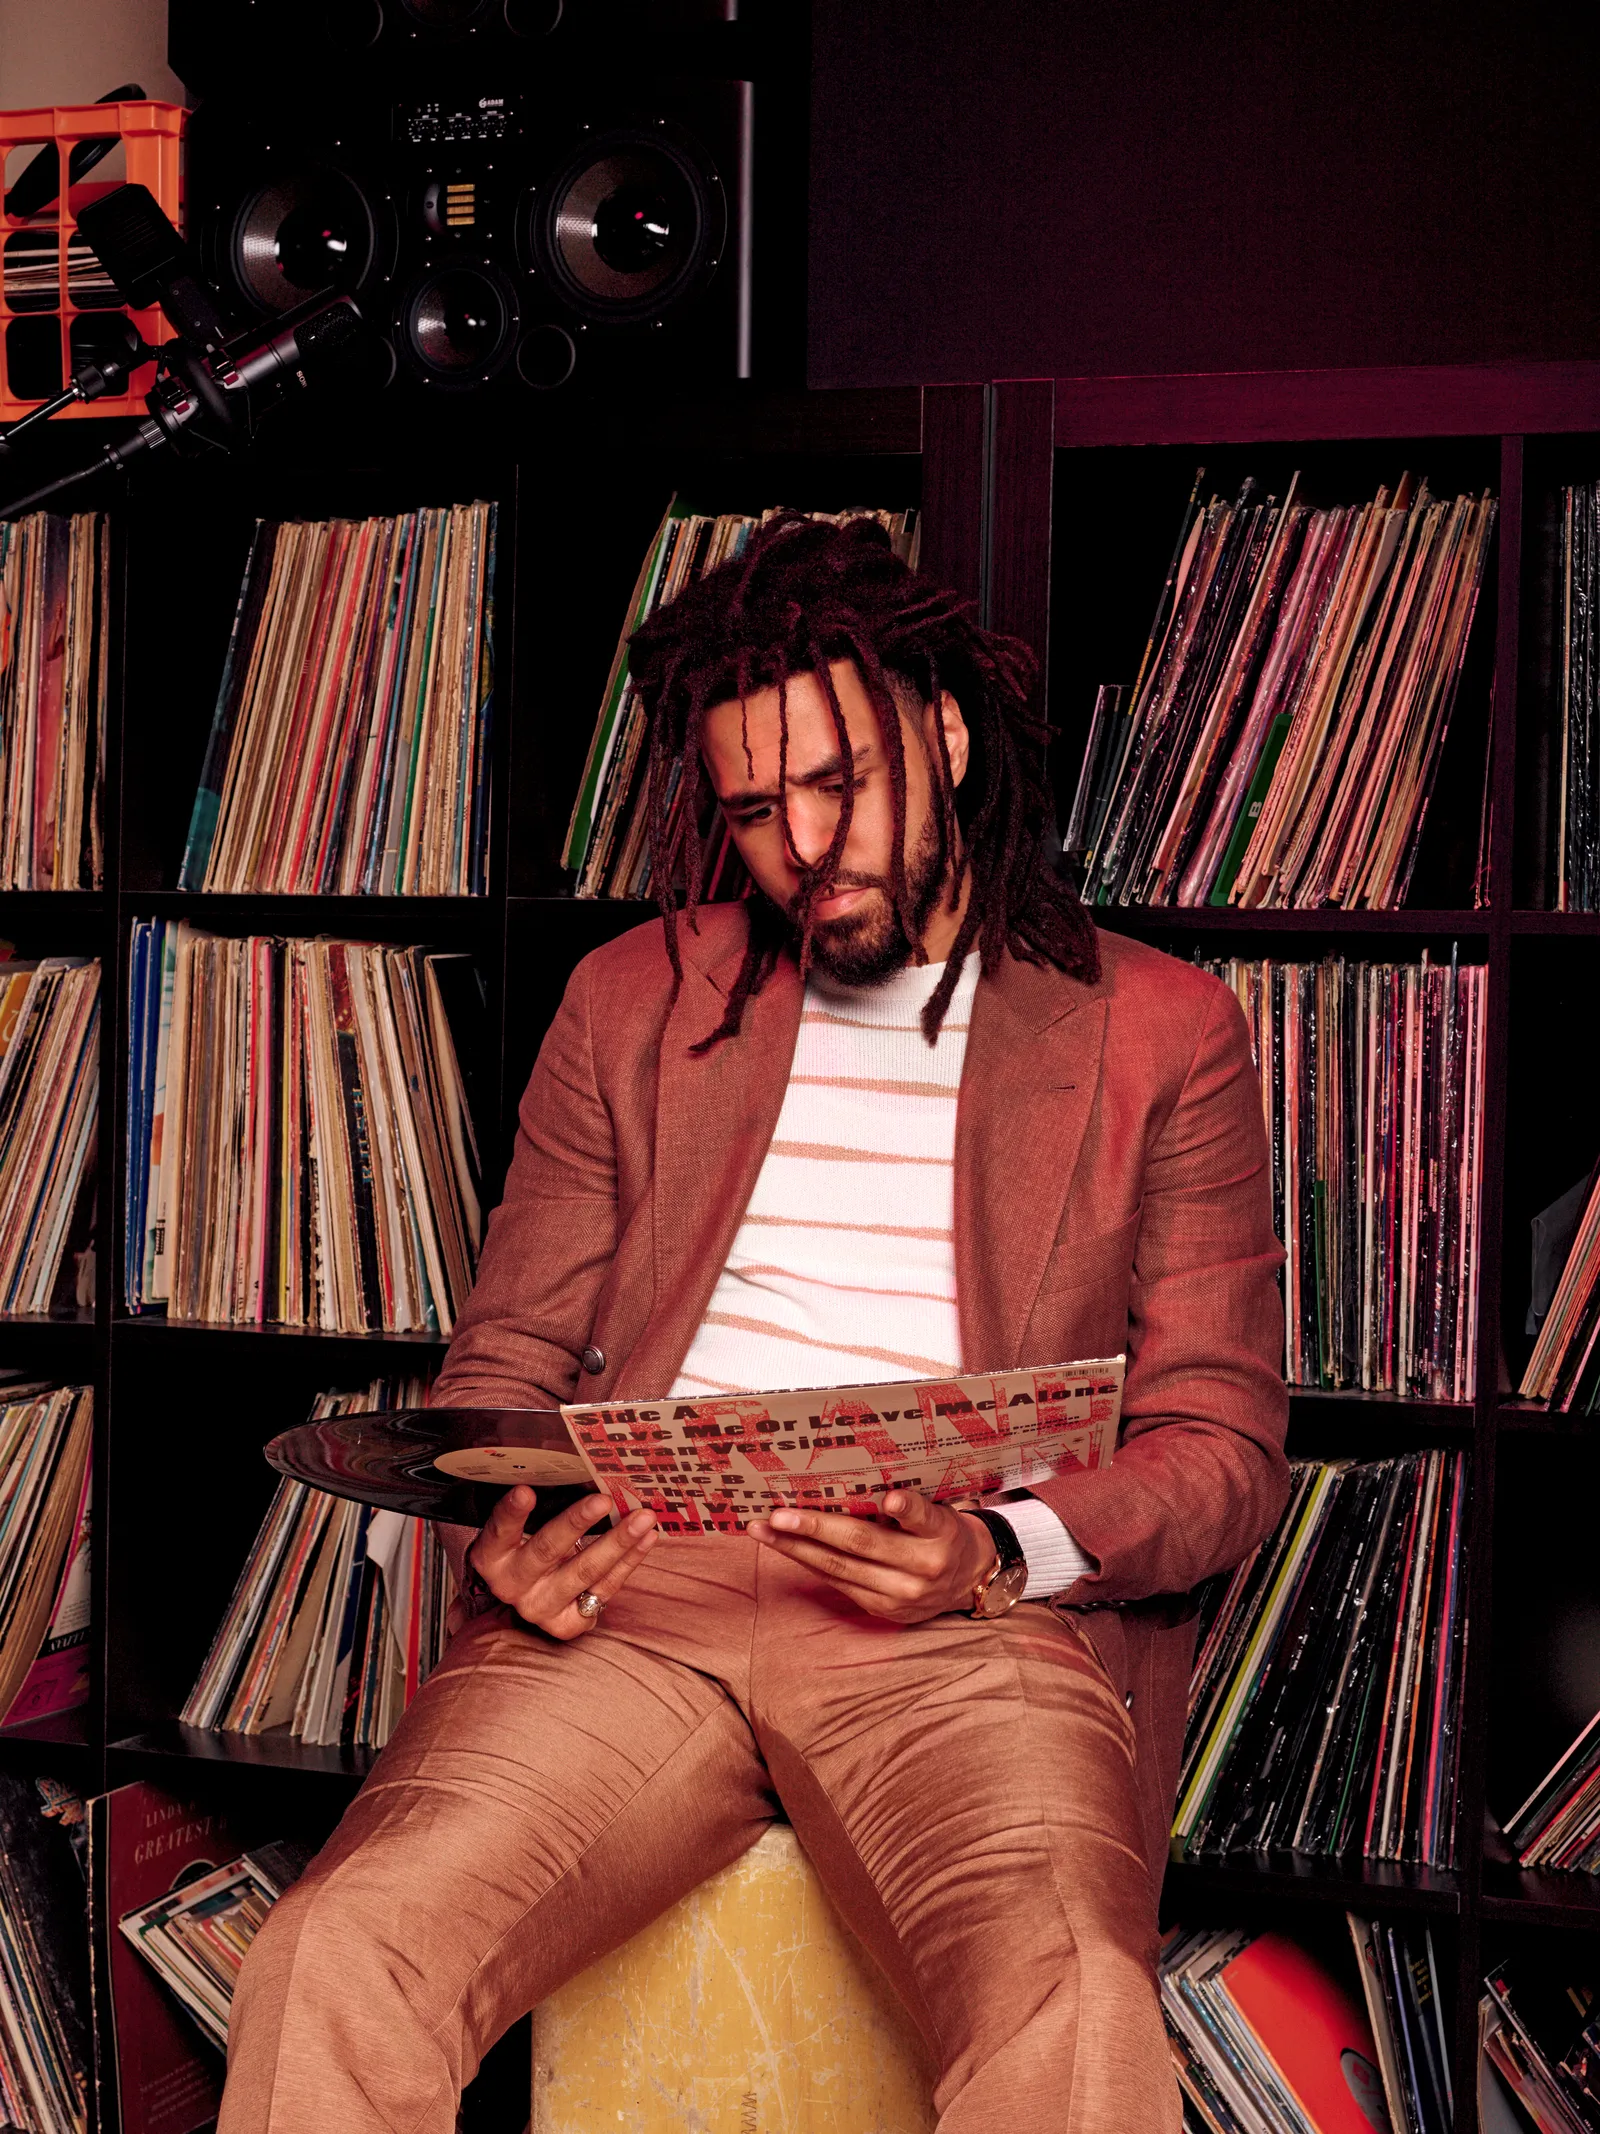 J.cole picture of him sitting starting at a vinyl